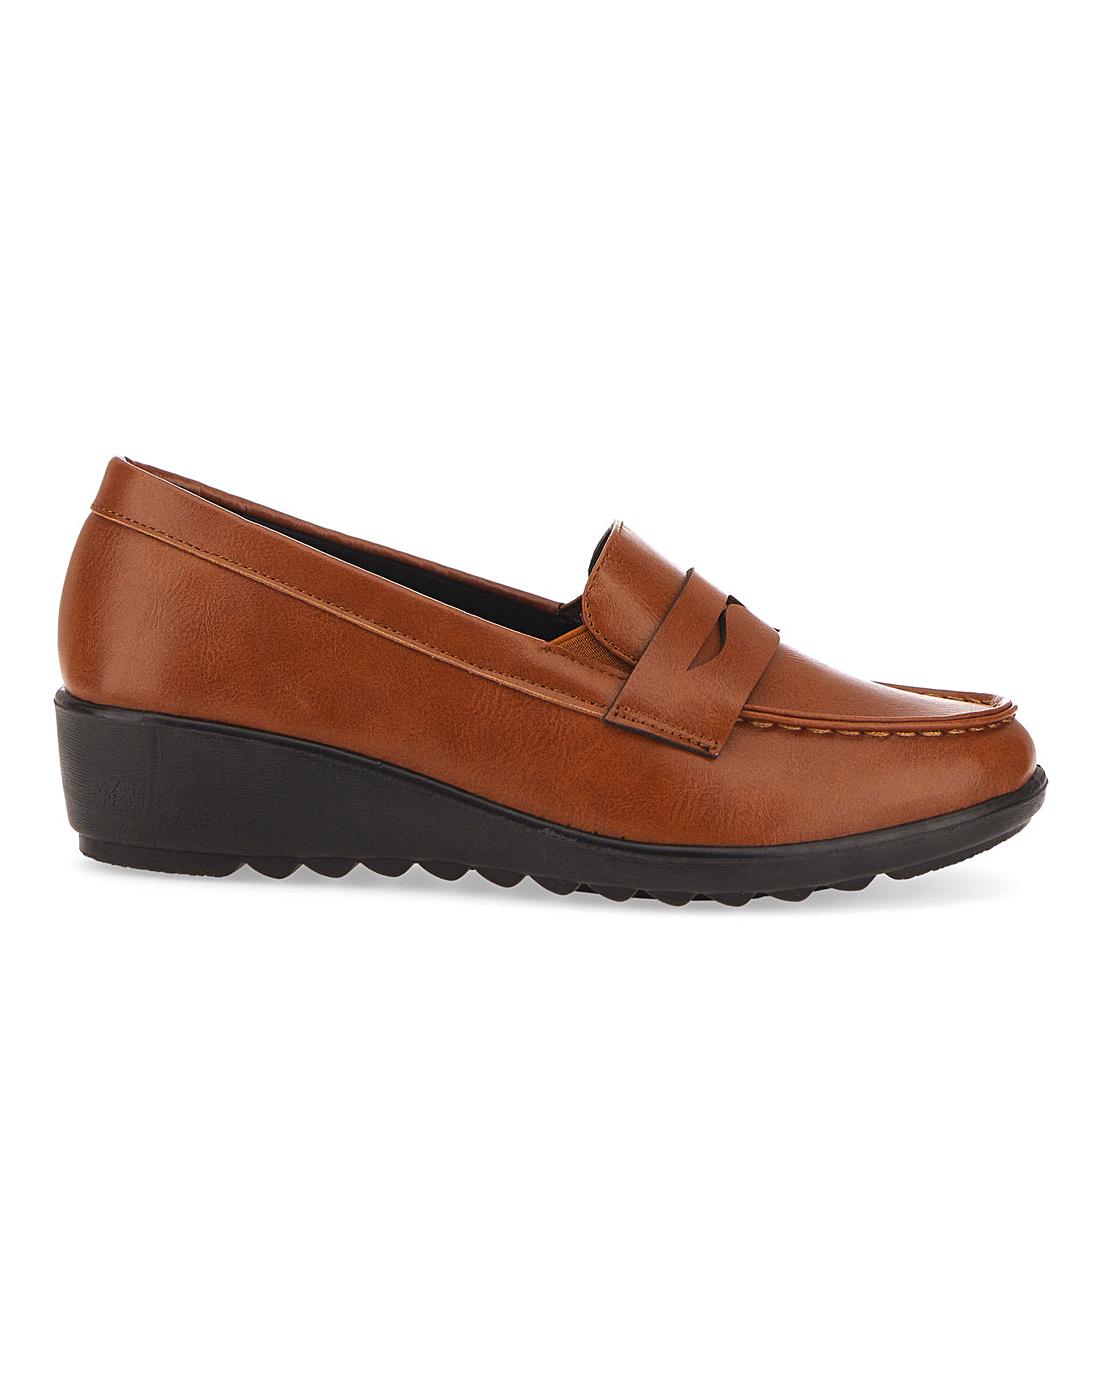 Cushion Walk Low Wedge Loafers E Fit | House of Bath